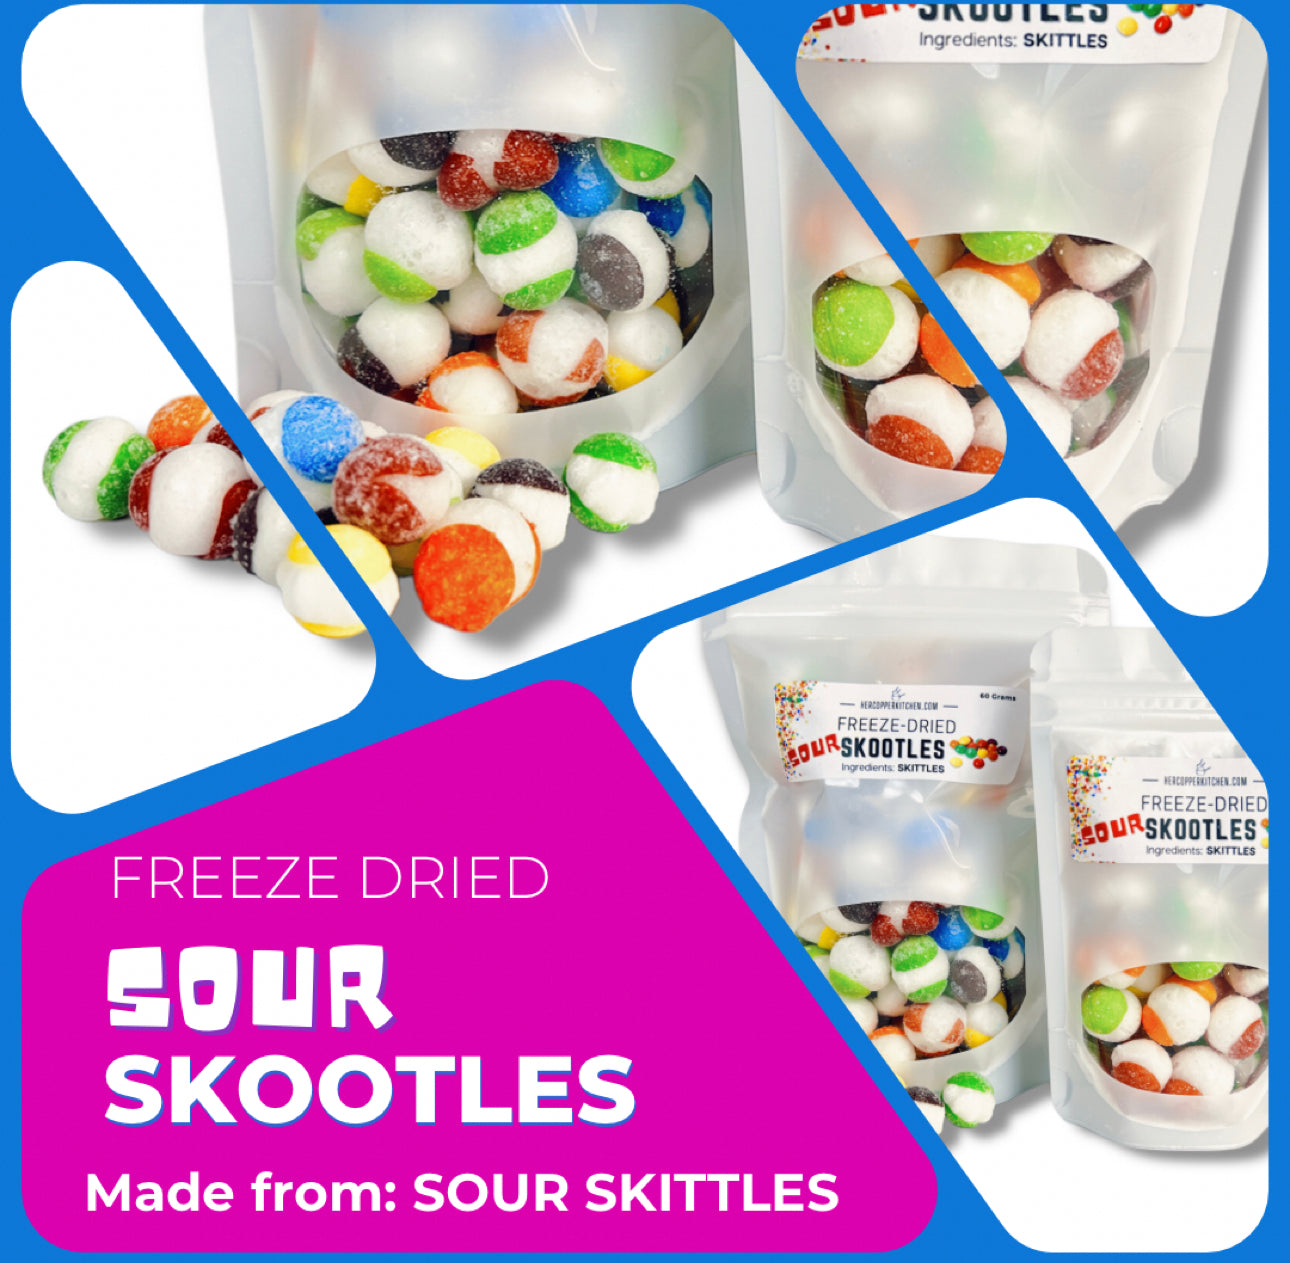 FREEZE DRIED SOUR SKOOTLES